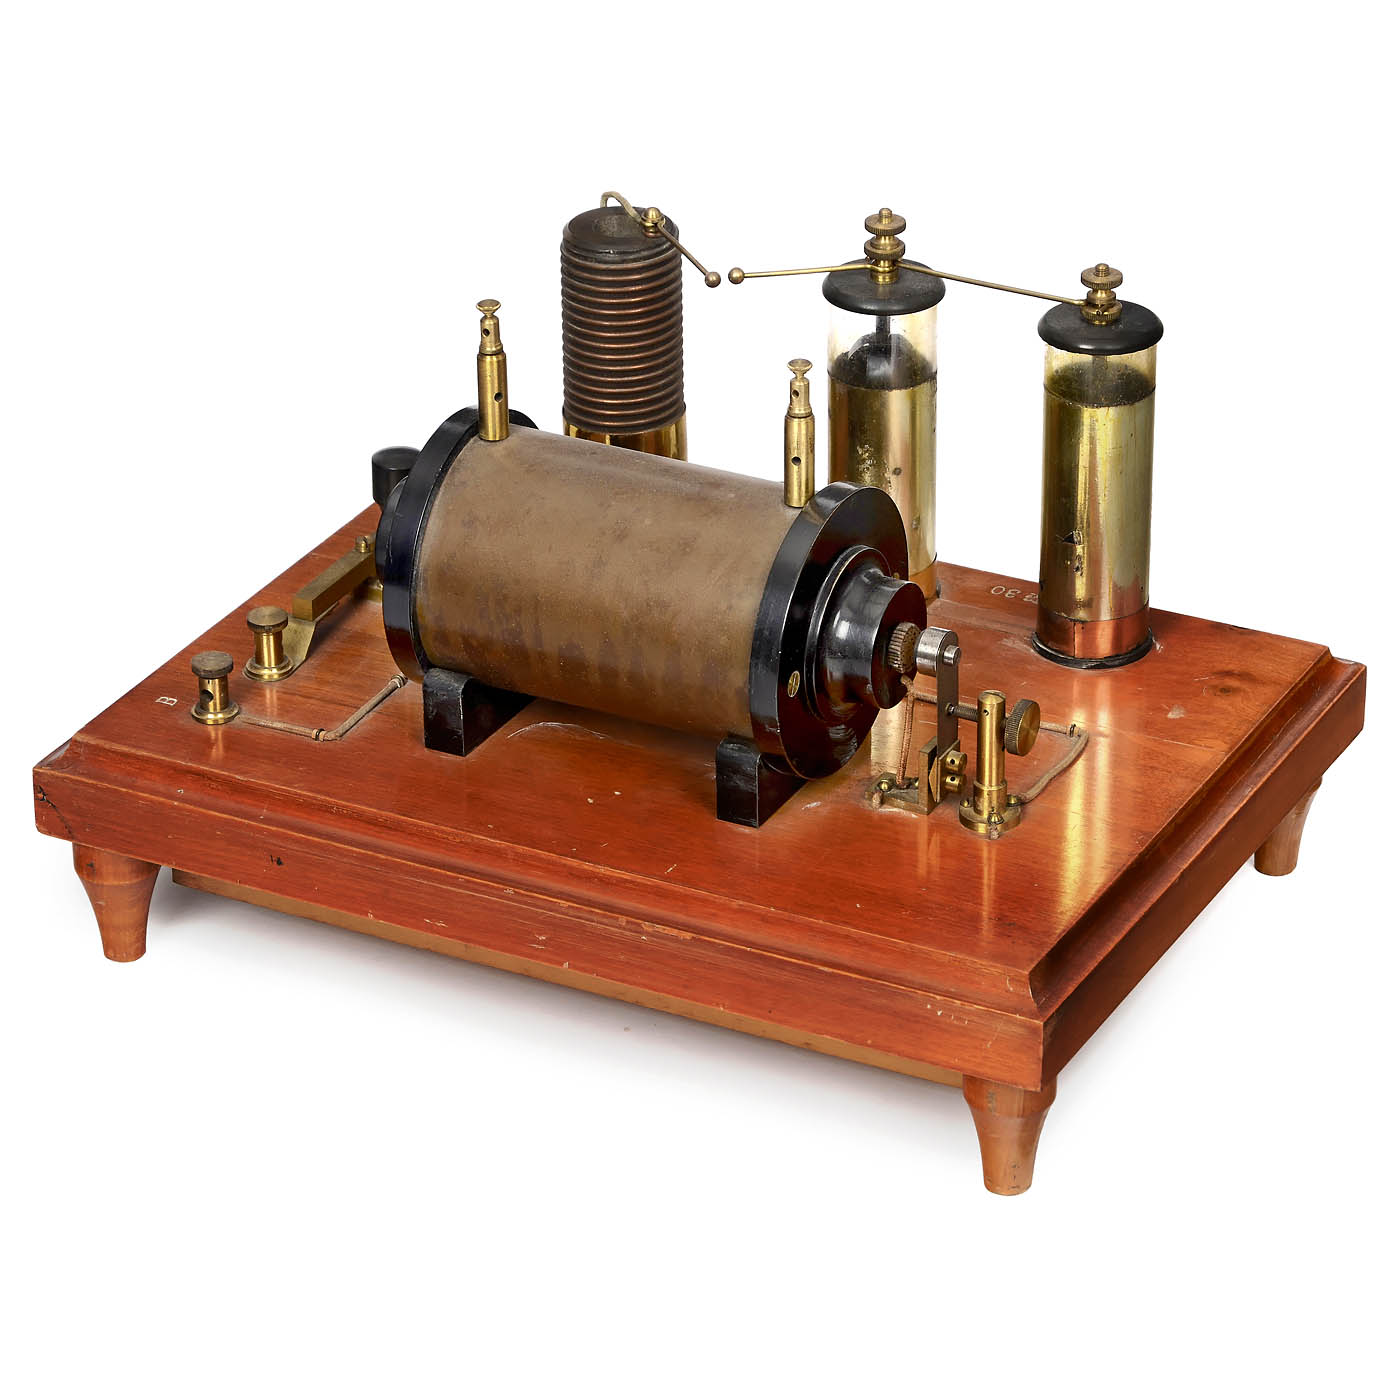 Slaby-Arco System Radiotelegraph Transmitter, c. 1900 - Image 2 of 3